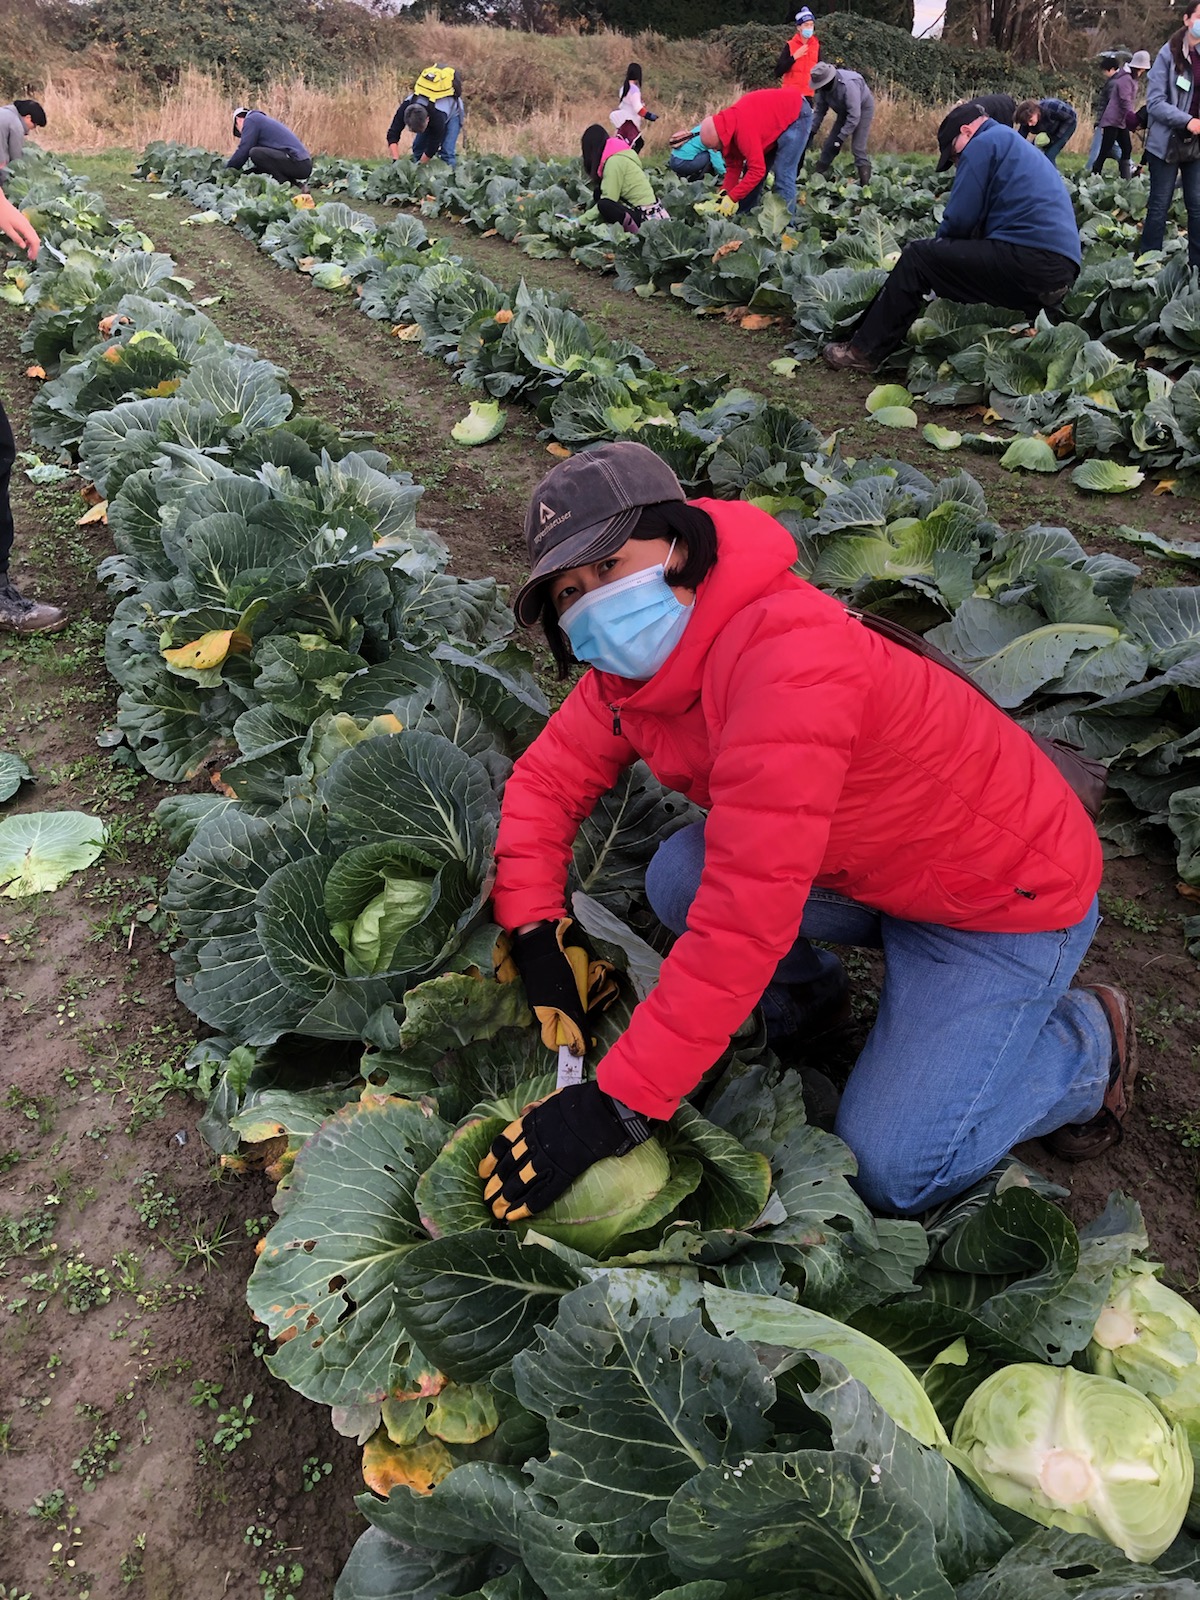 Image of Yuzhen Li volunteering to harvest crops at the Food Bank Farm in Washington's Snohomish River Valley.